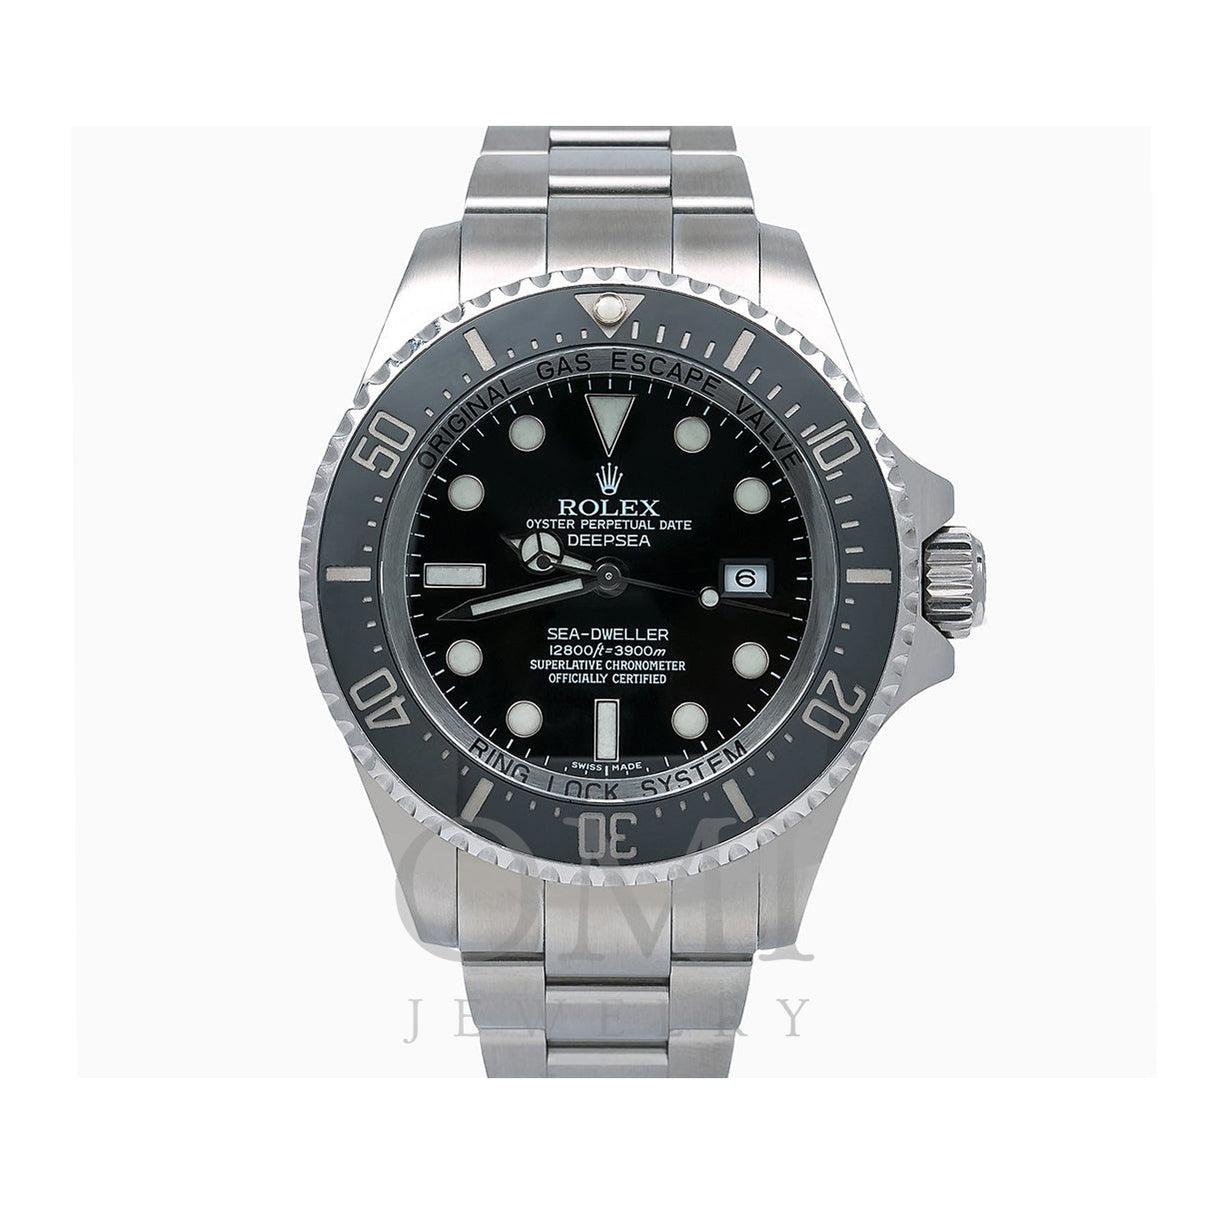 Rolex Sea-Dweller Deepsea 116660 44MM Black Dial With Stainless - OMI